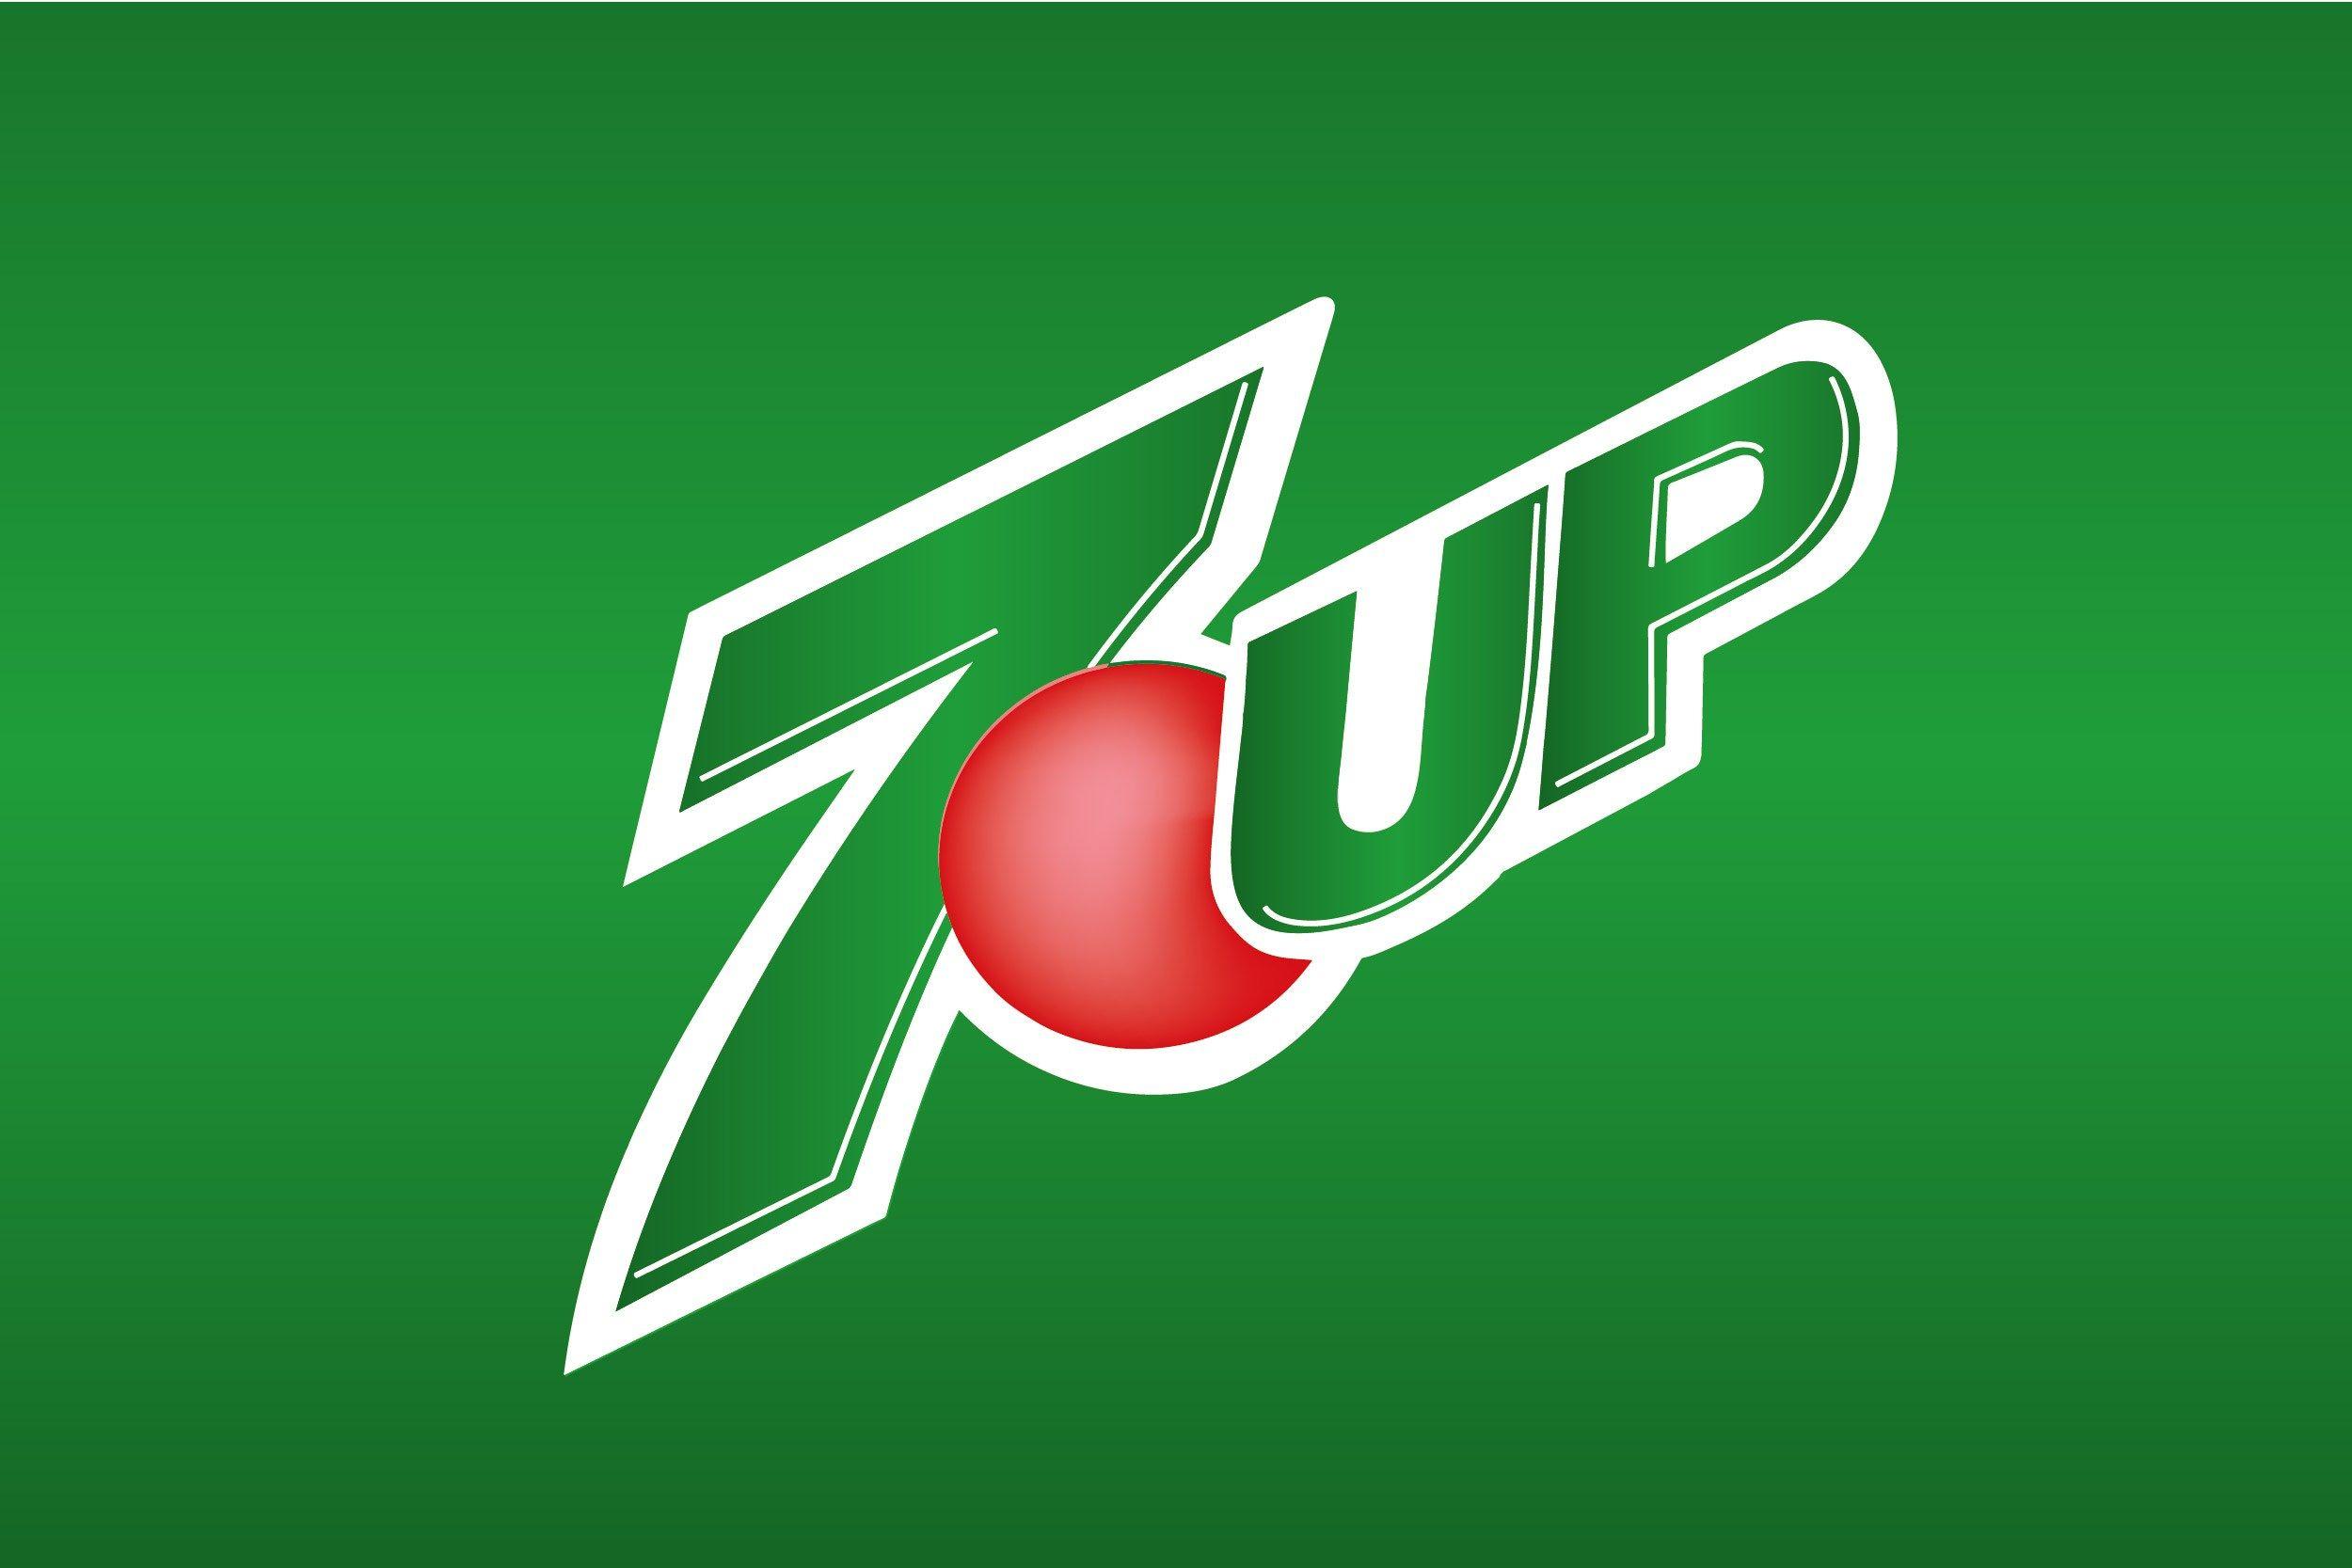 Seven Up Logo - Shareholders Approve 7-Up's Takeover by Affelka |